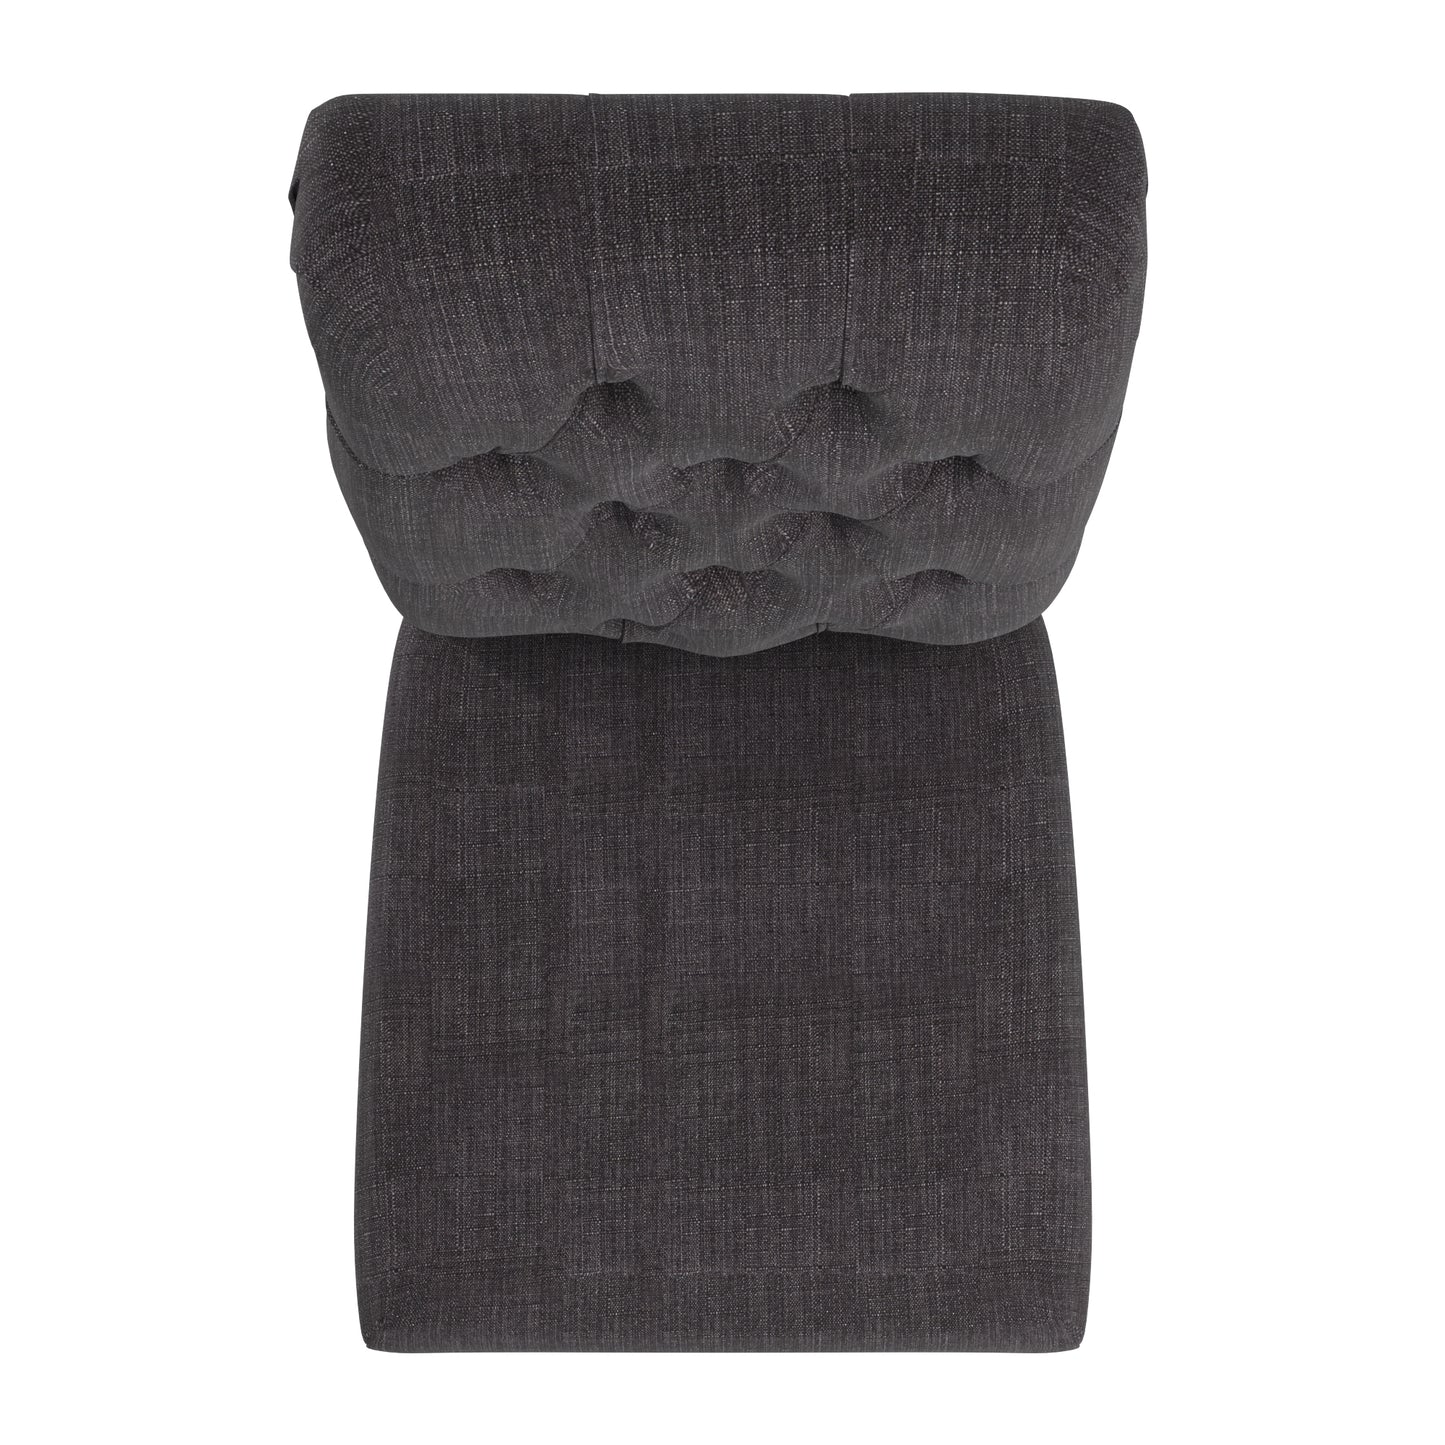 Premium Tufted Rolled Back Parsons Chairs (Set of 2) - Dark Grey Linen